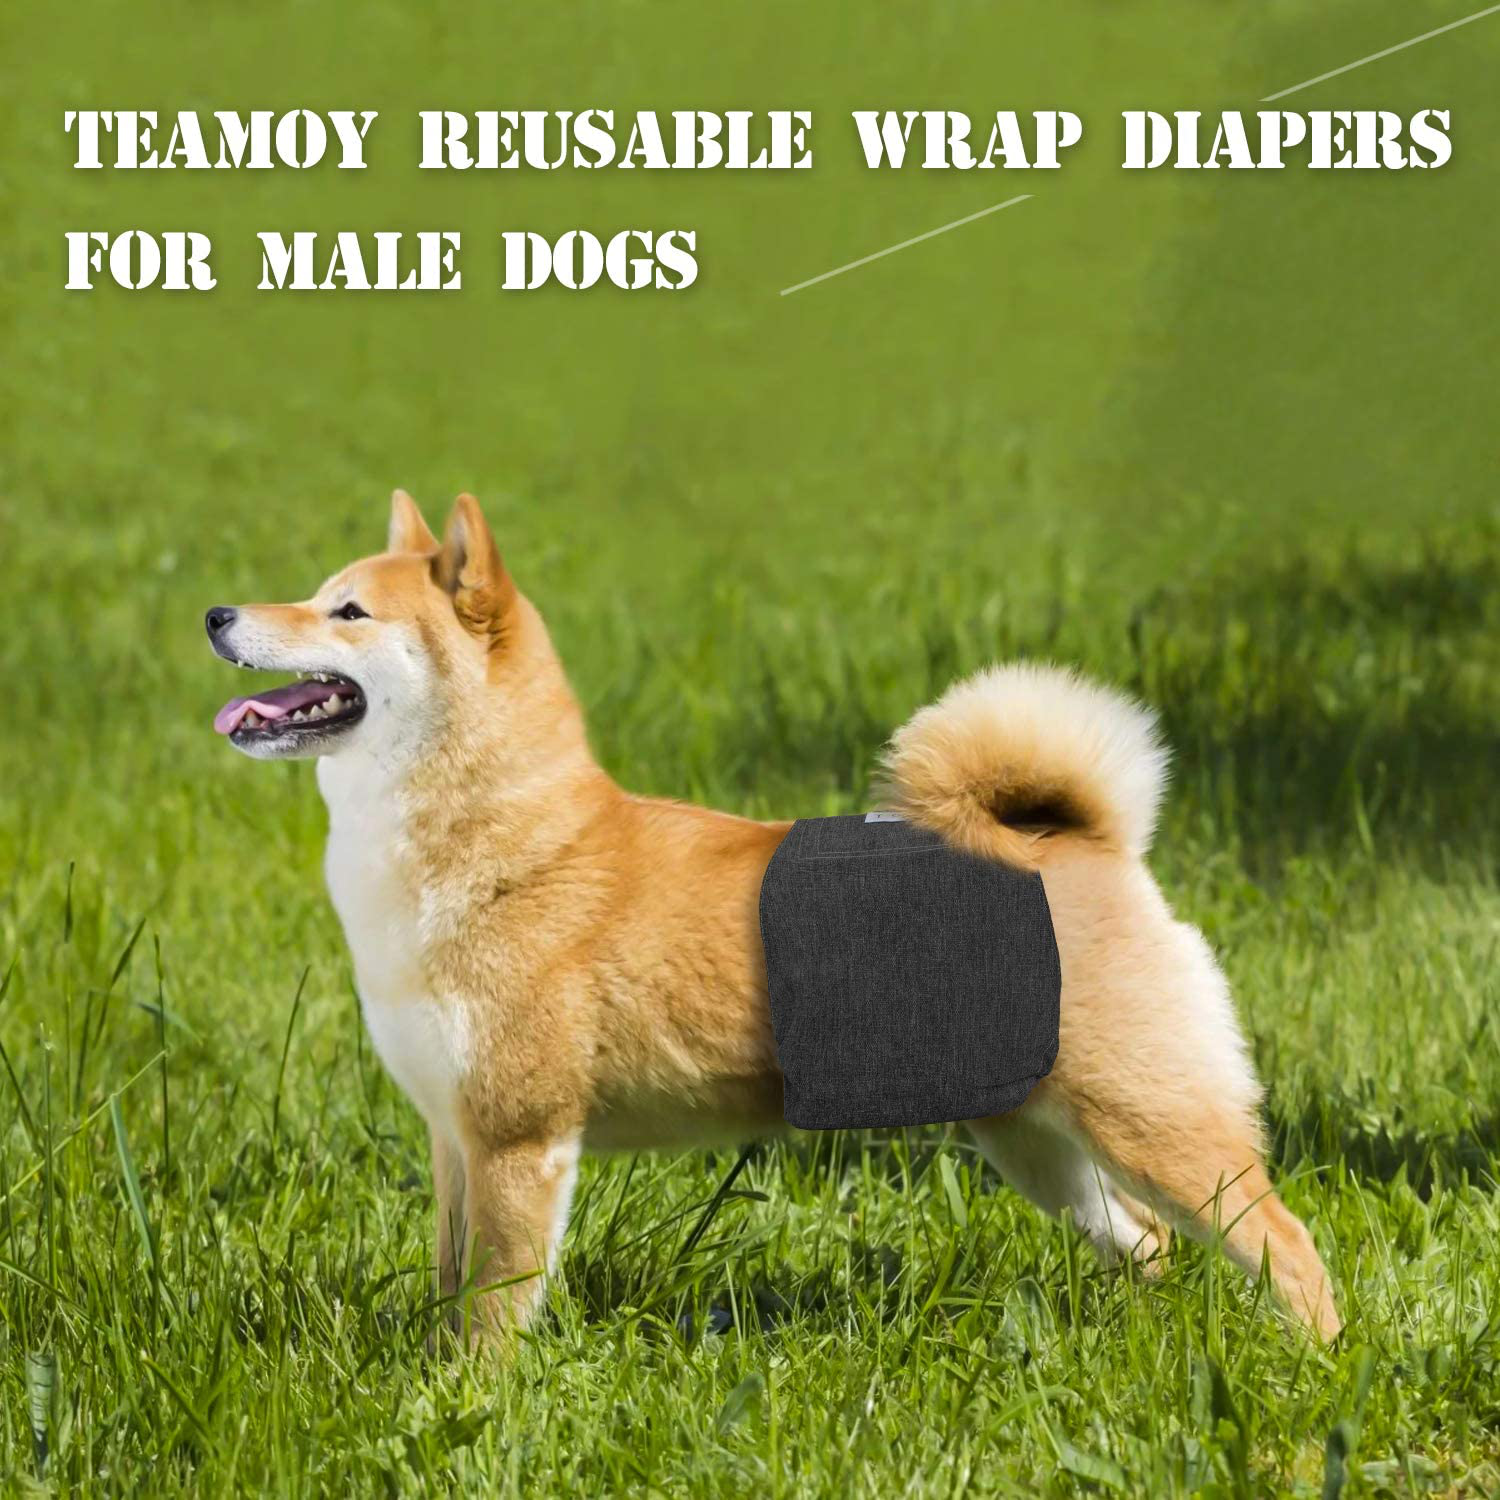 Teamoy 3Pcs Reusable Wrap Diapers for Male Dogs, Washable Puppy Belly Band